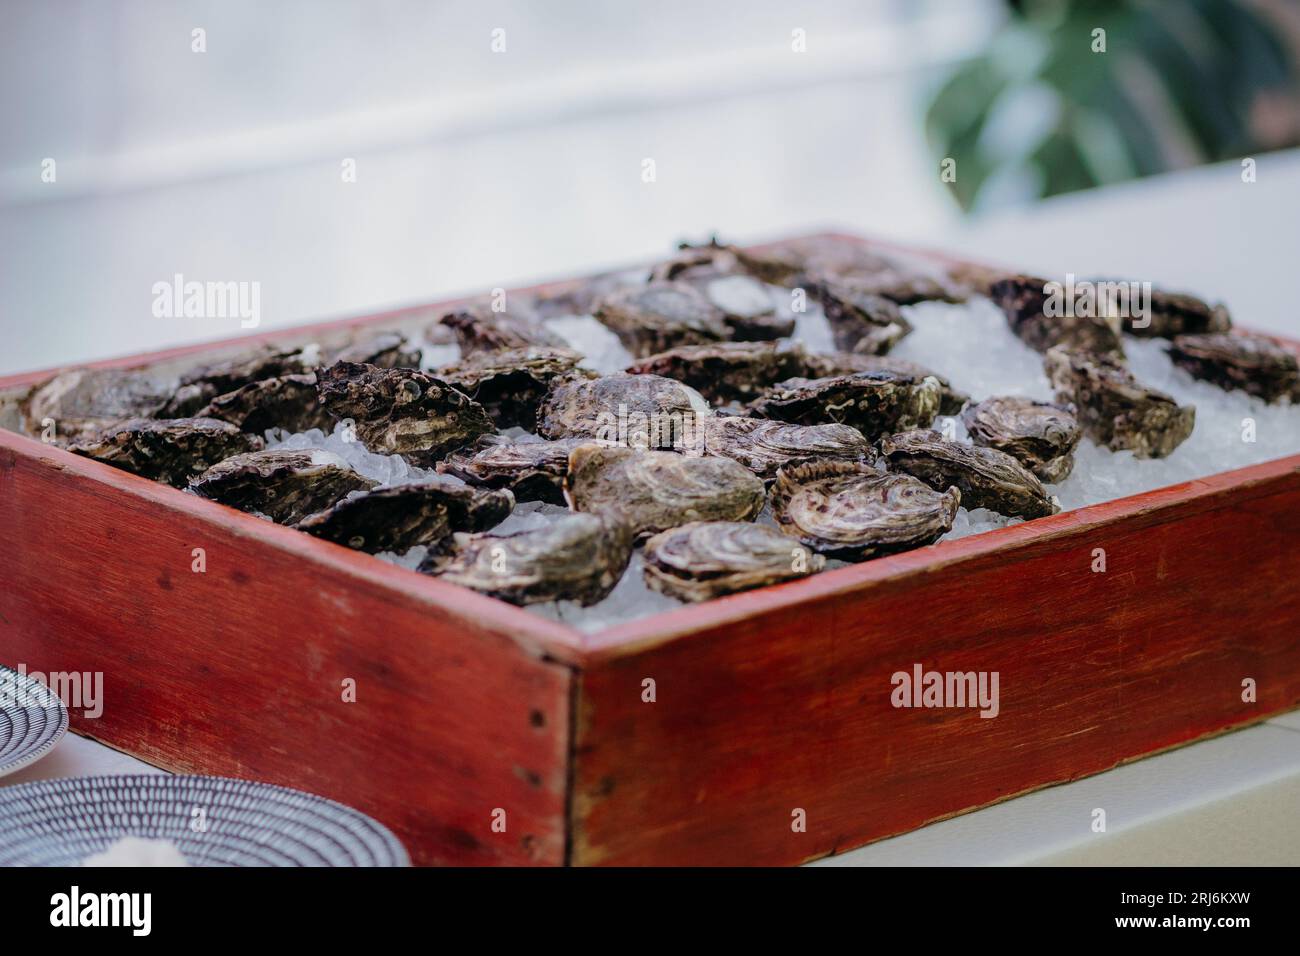 A close-up image of a plate of freshly shucked oysters on a bed of crushed ice Stock Photo